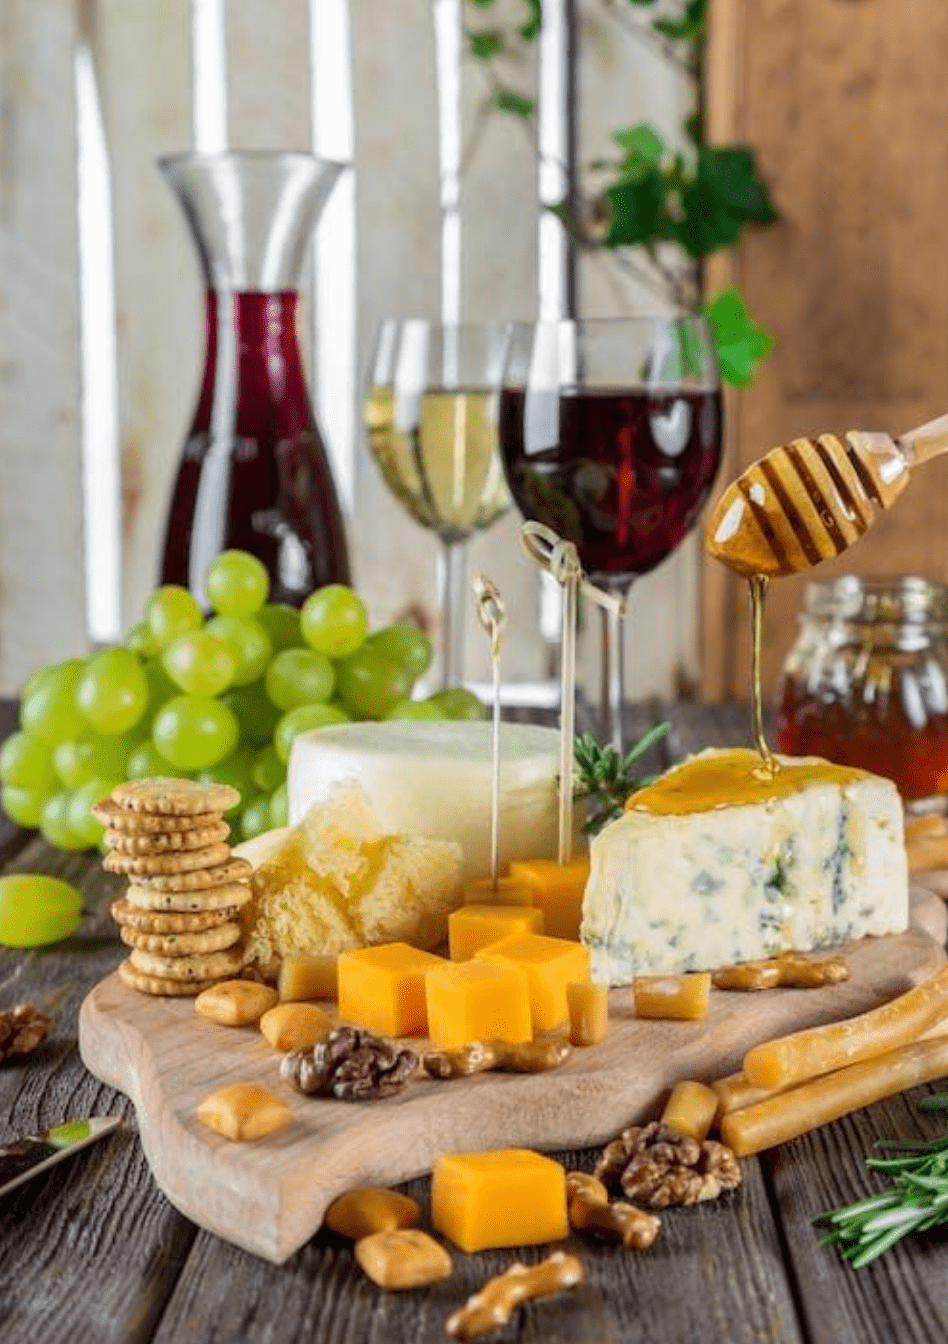 Glasses of wine next to a cheese board